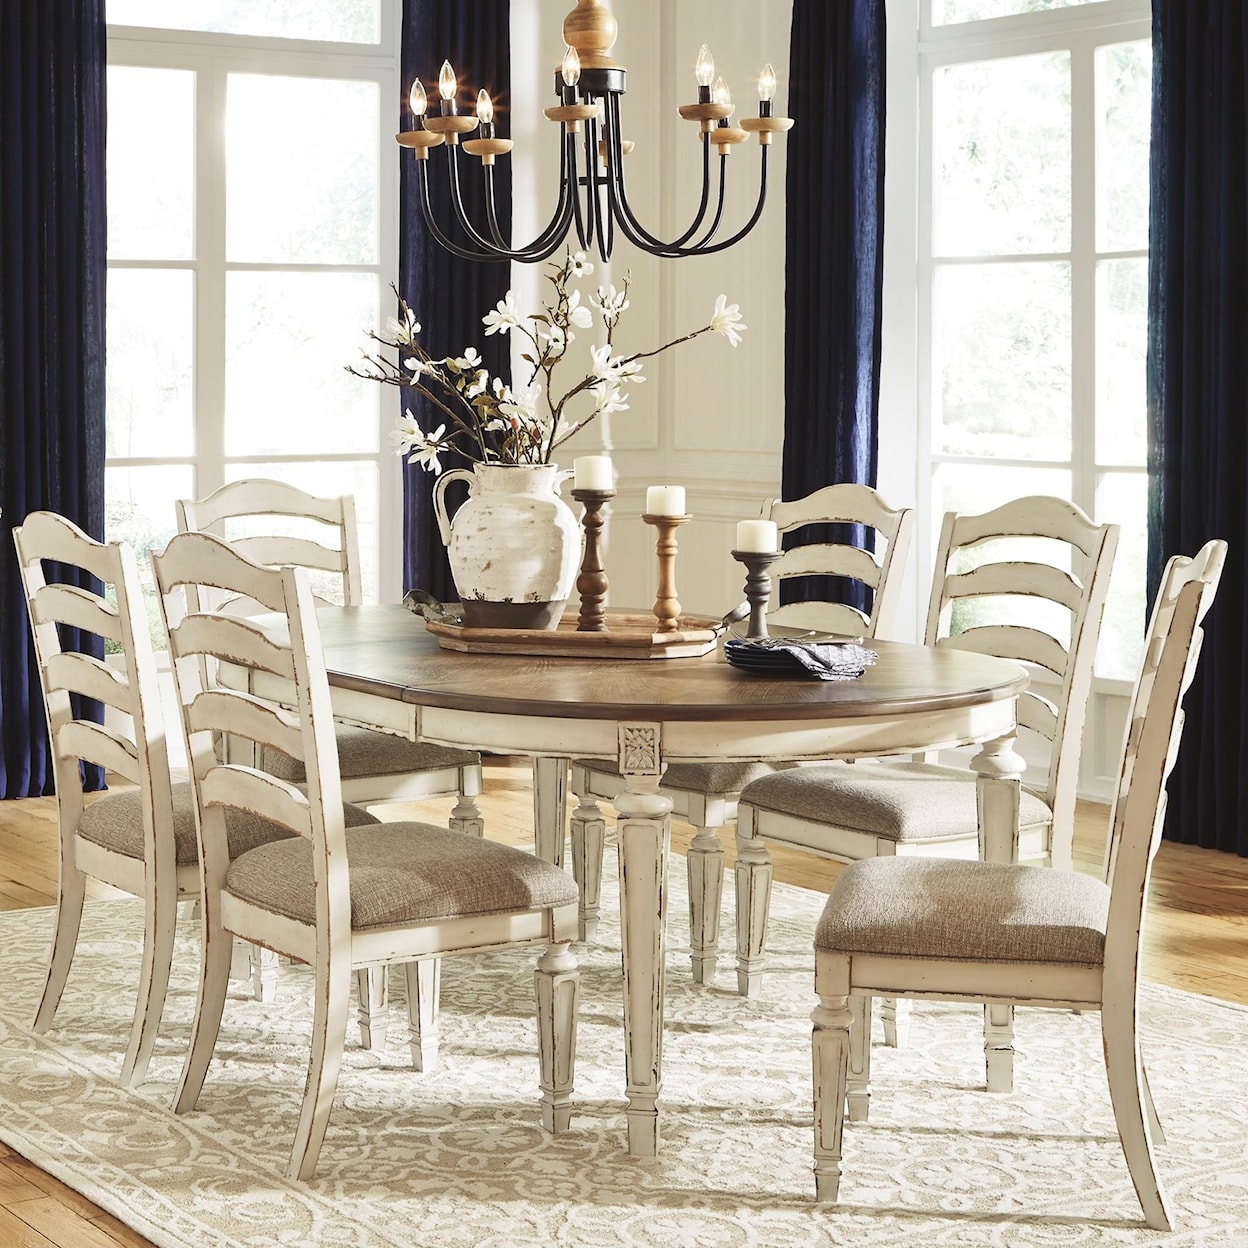 Signature Design by Ashley Realyn 7-Piece Table and Chair Set